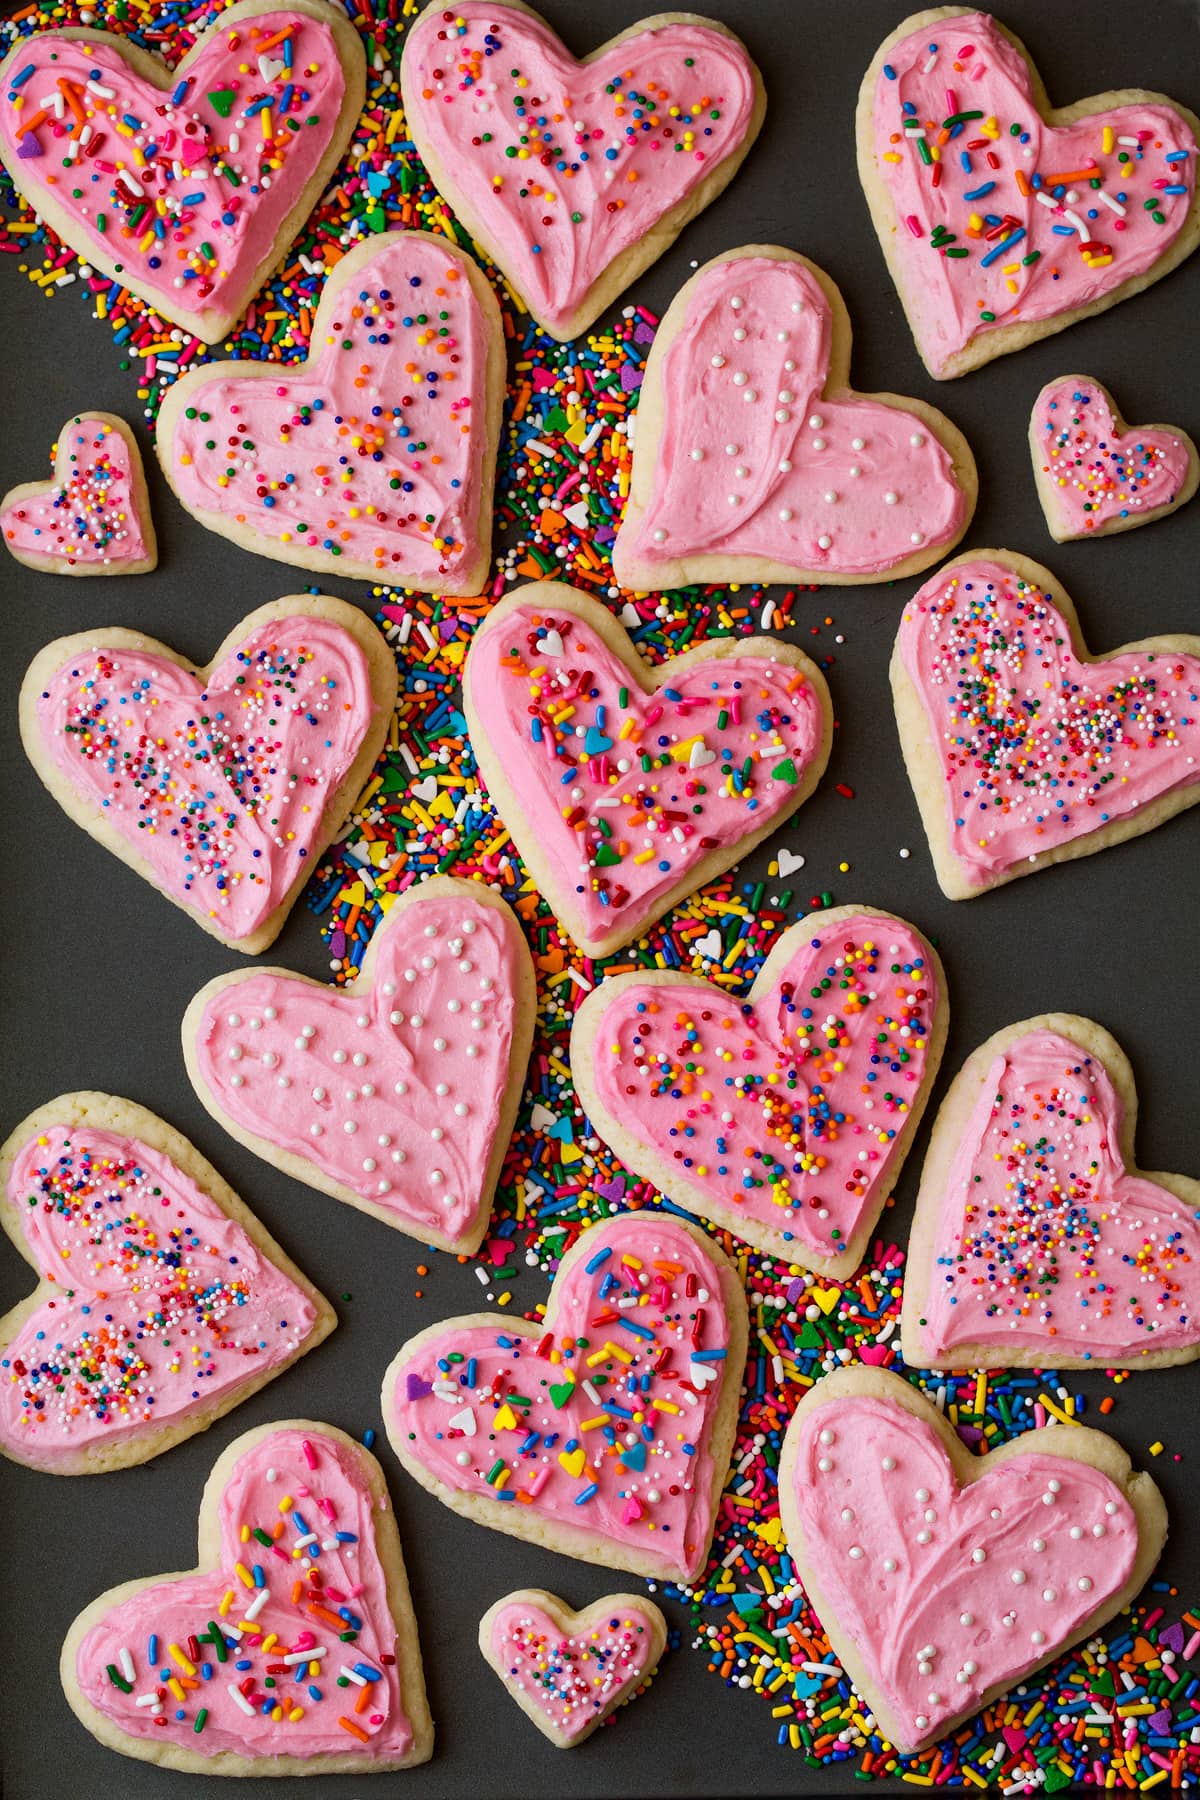 Soft Frosted Sugar Cookies cutout into heart shapes